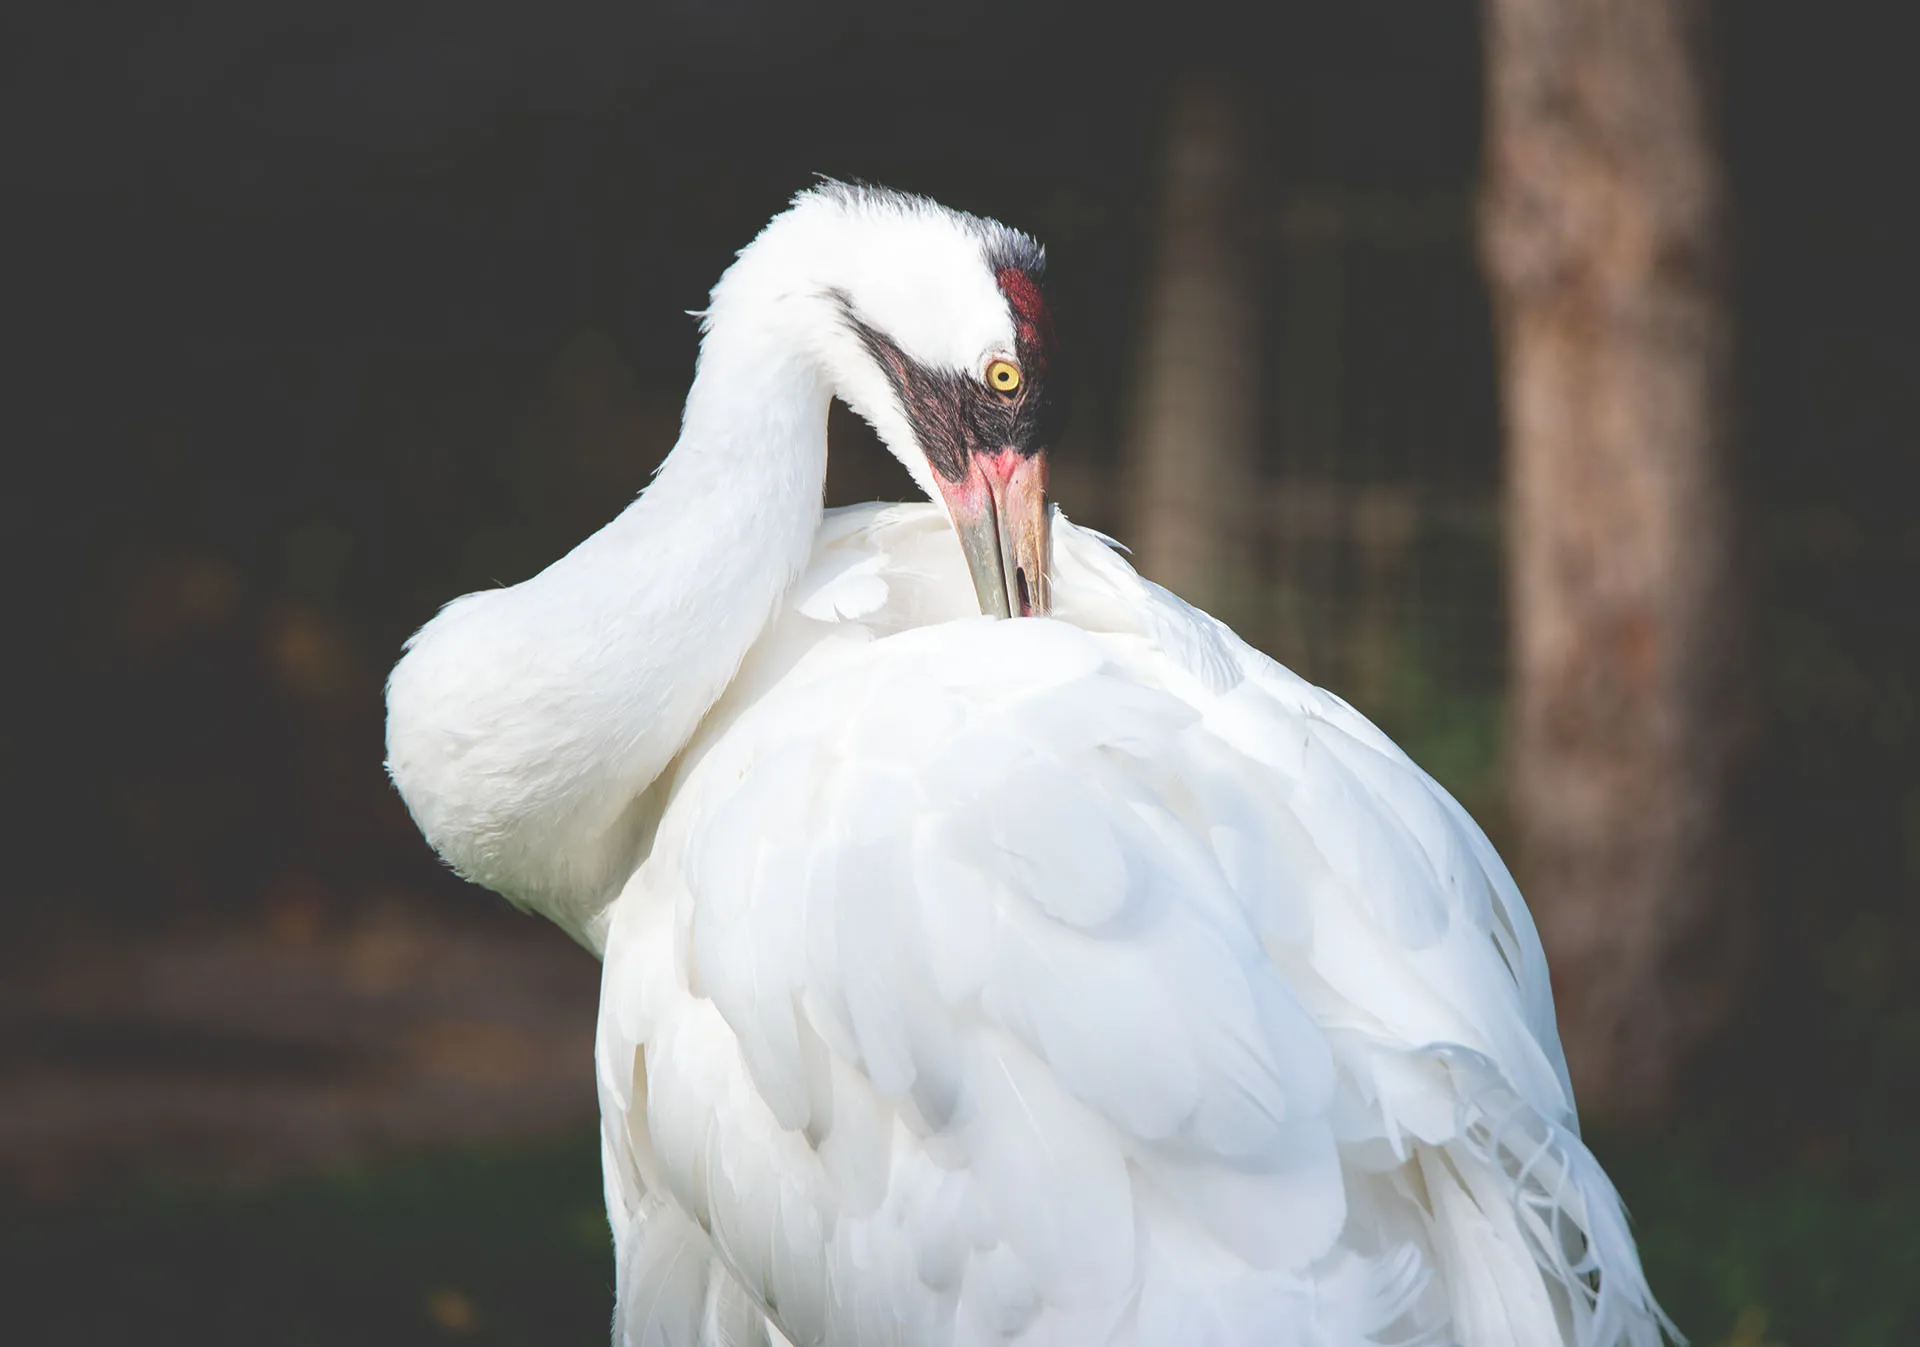 Adult whooping crane at the Wilder Institute's conservation breeding facility